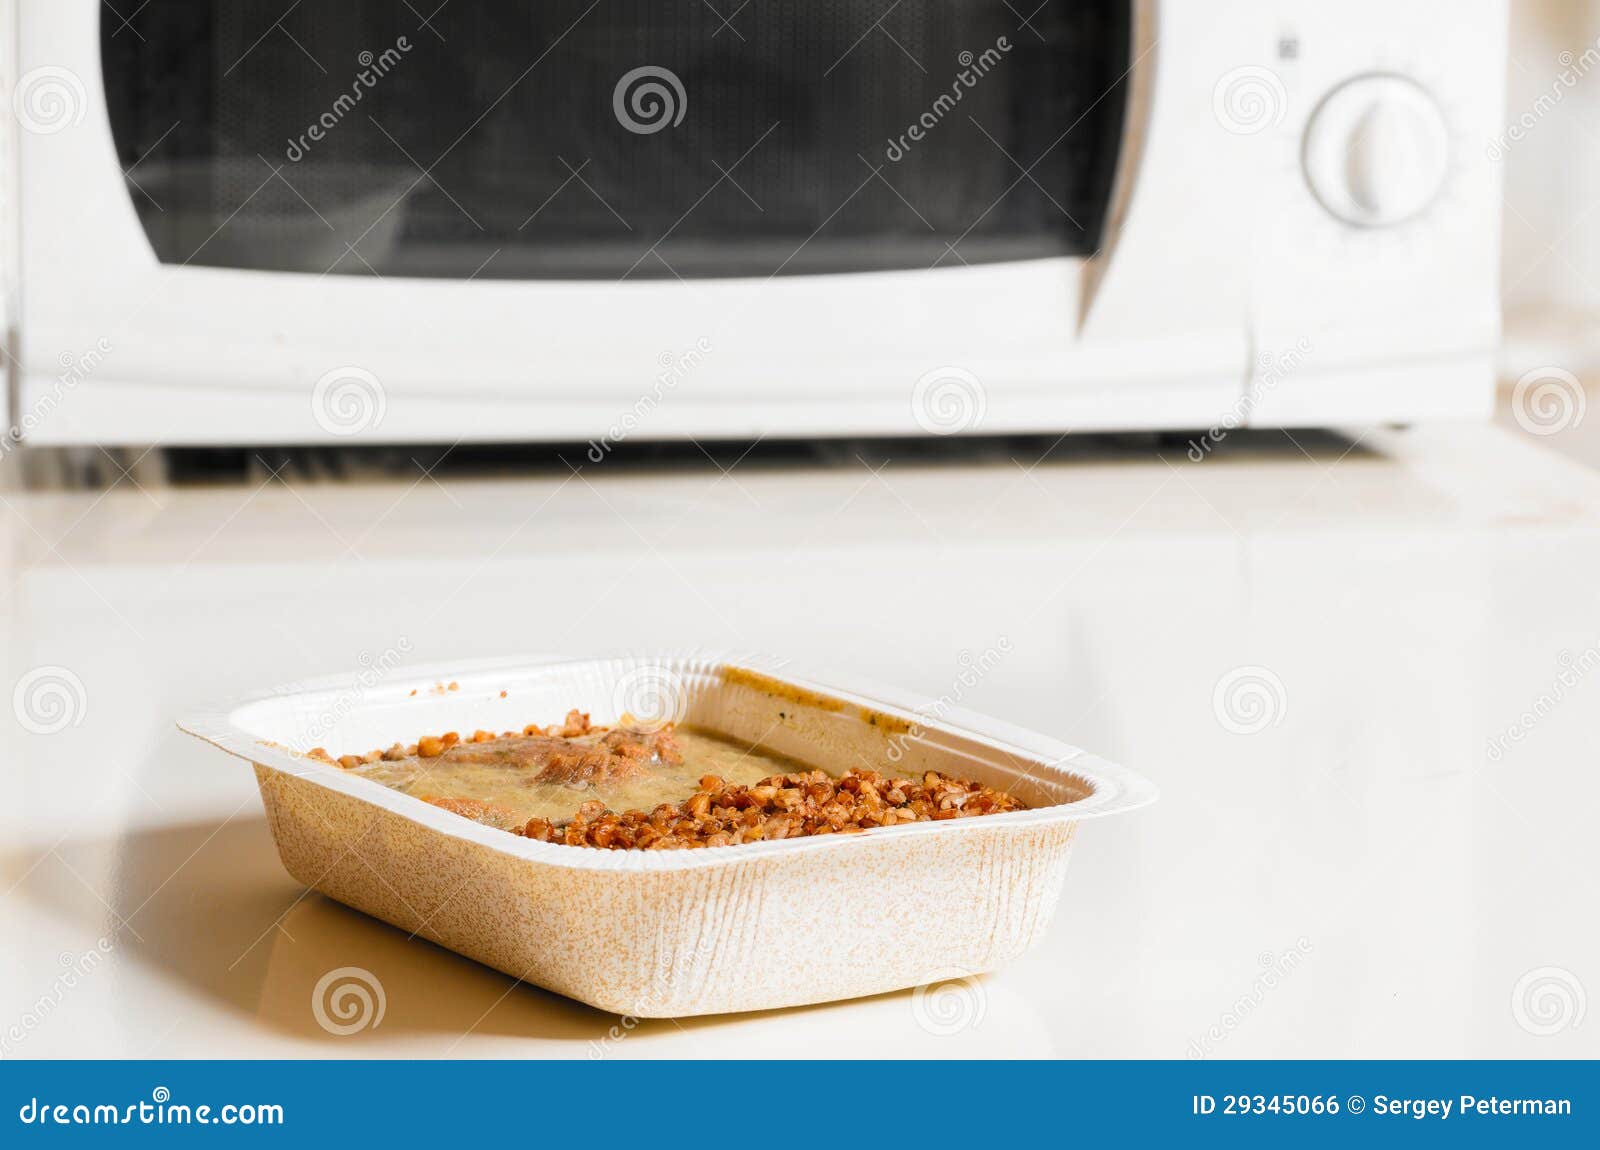 Microwave Oven With Frozen Food Stock Image Image Of Meal,, 48% OFF